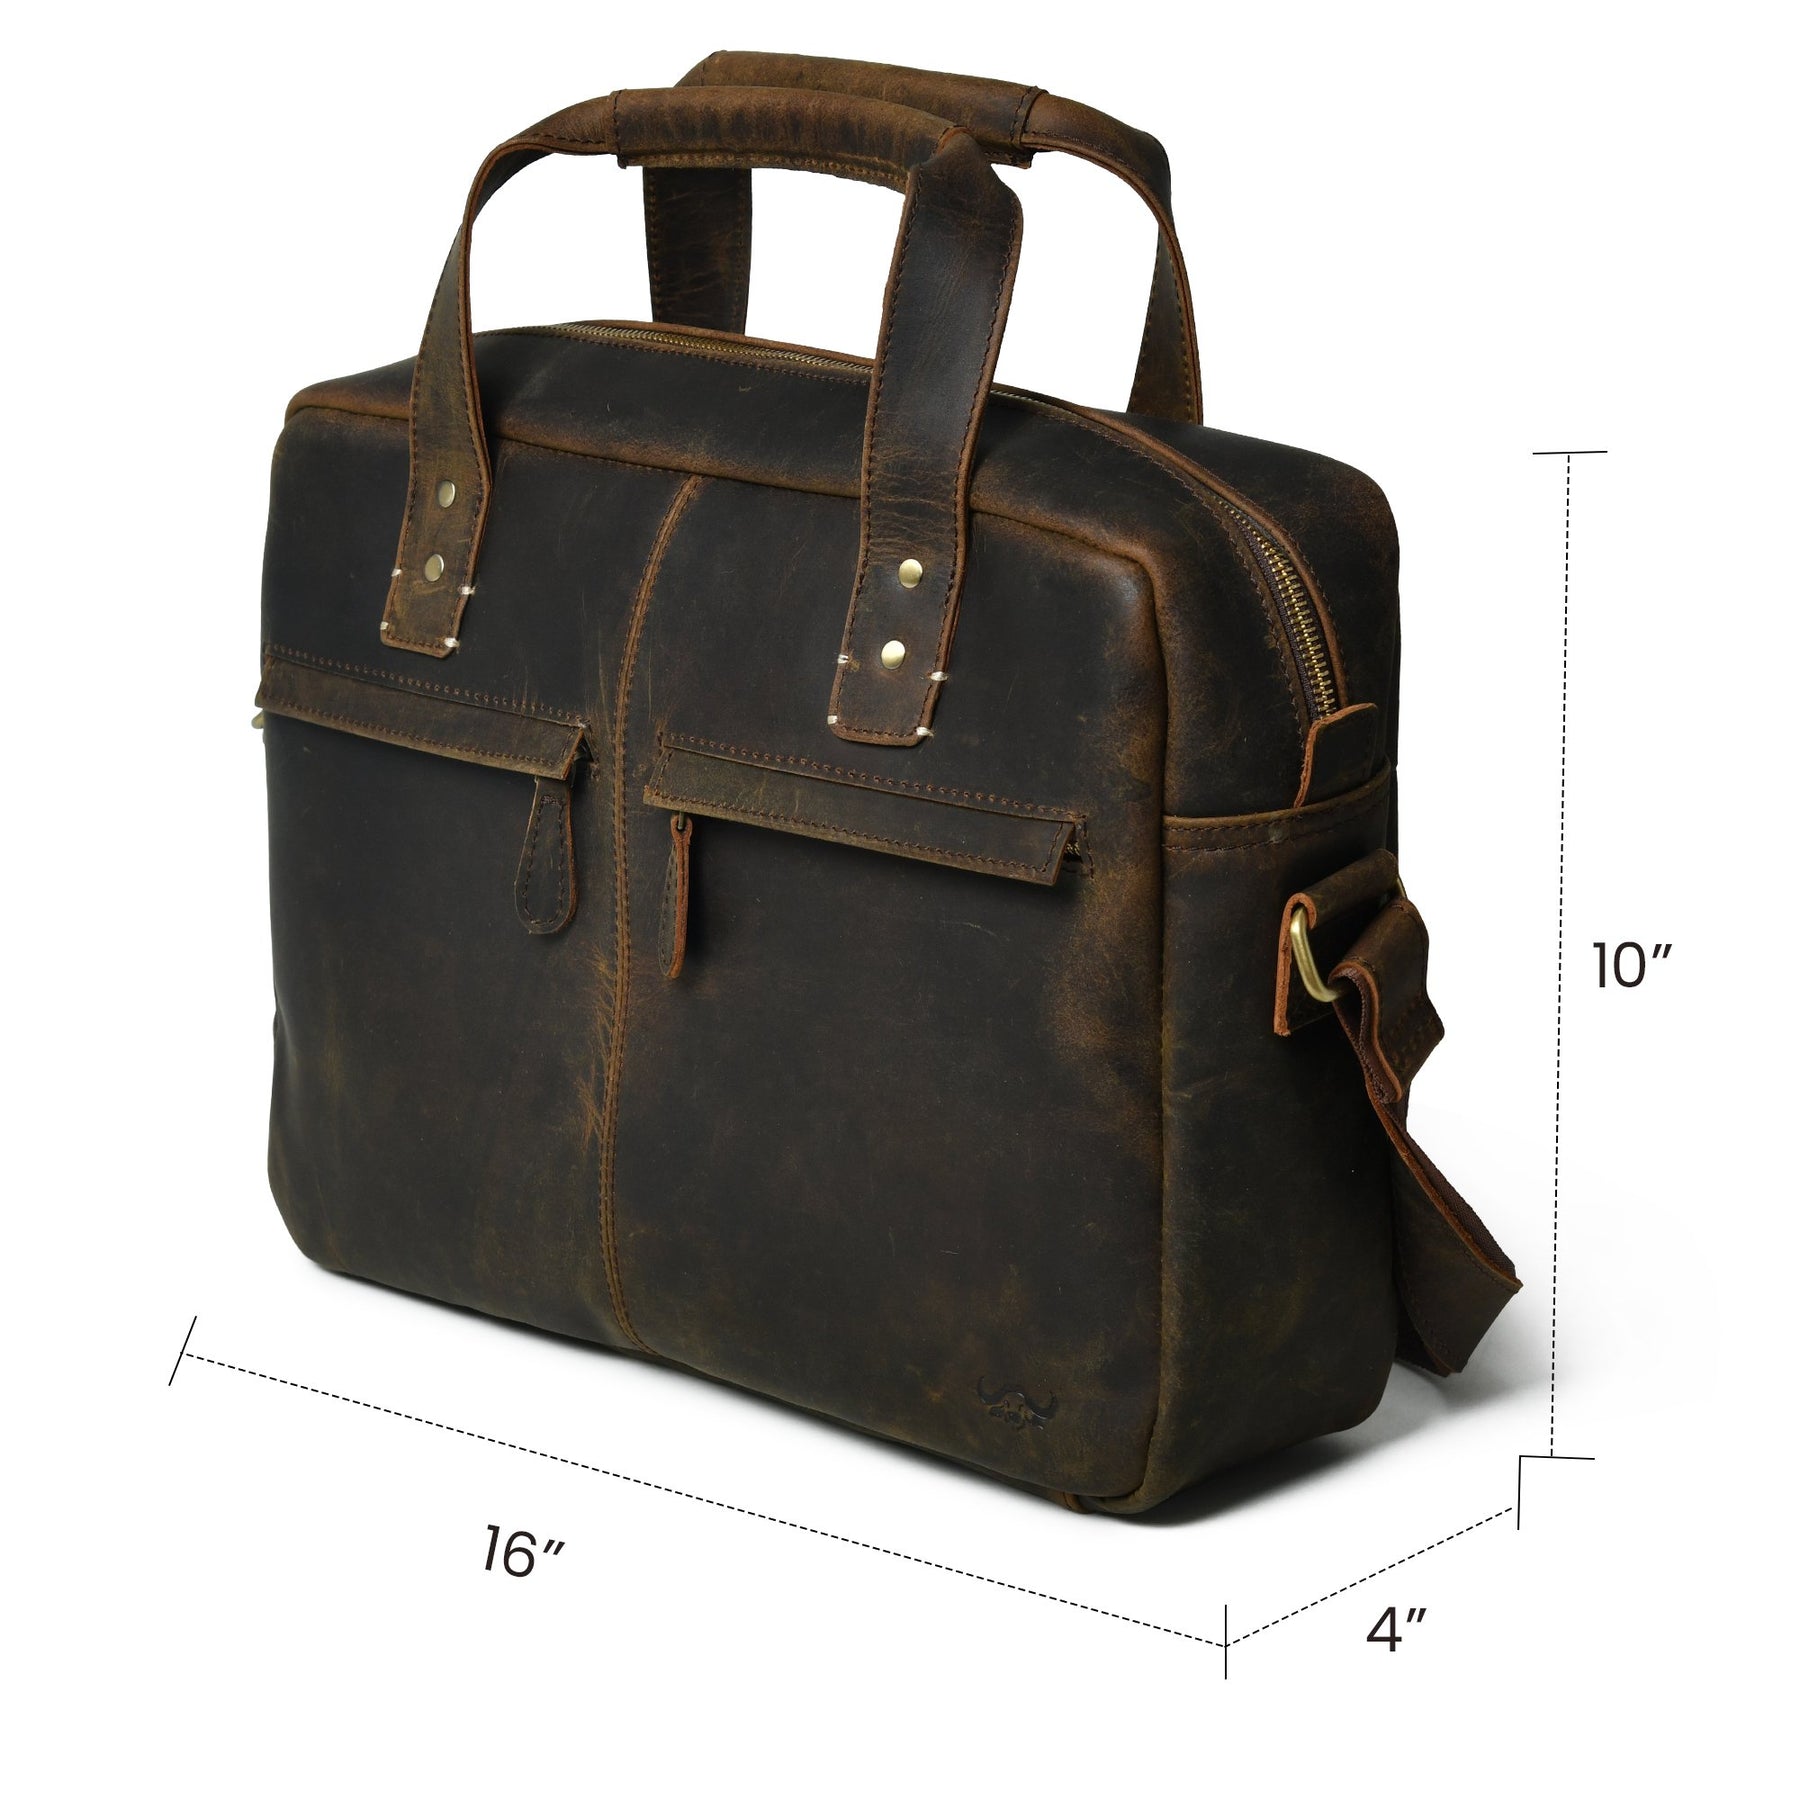 Buy Vintage Buffalo Leather Laptop Bag Online in USA at Lowest Prices ...